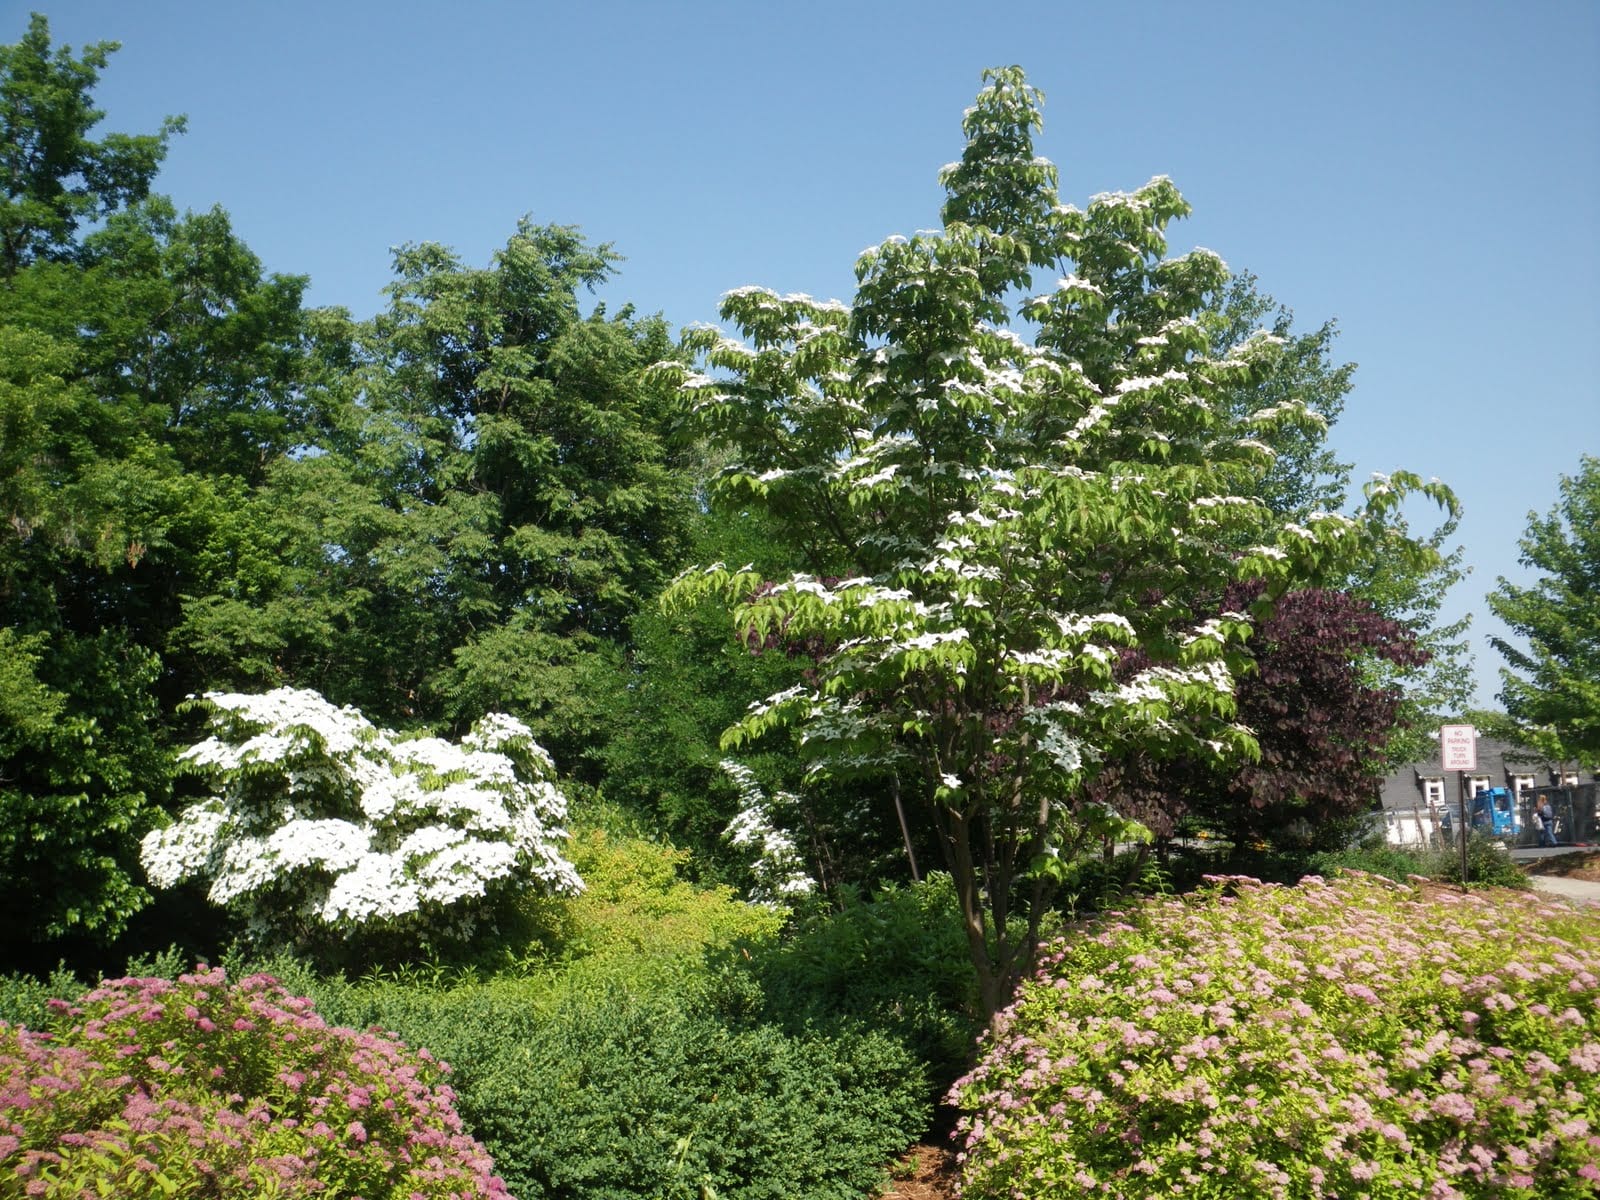 Designing With Native Plant Communities Natural Landscaping 